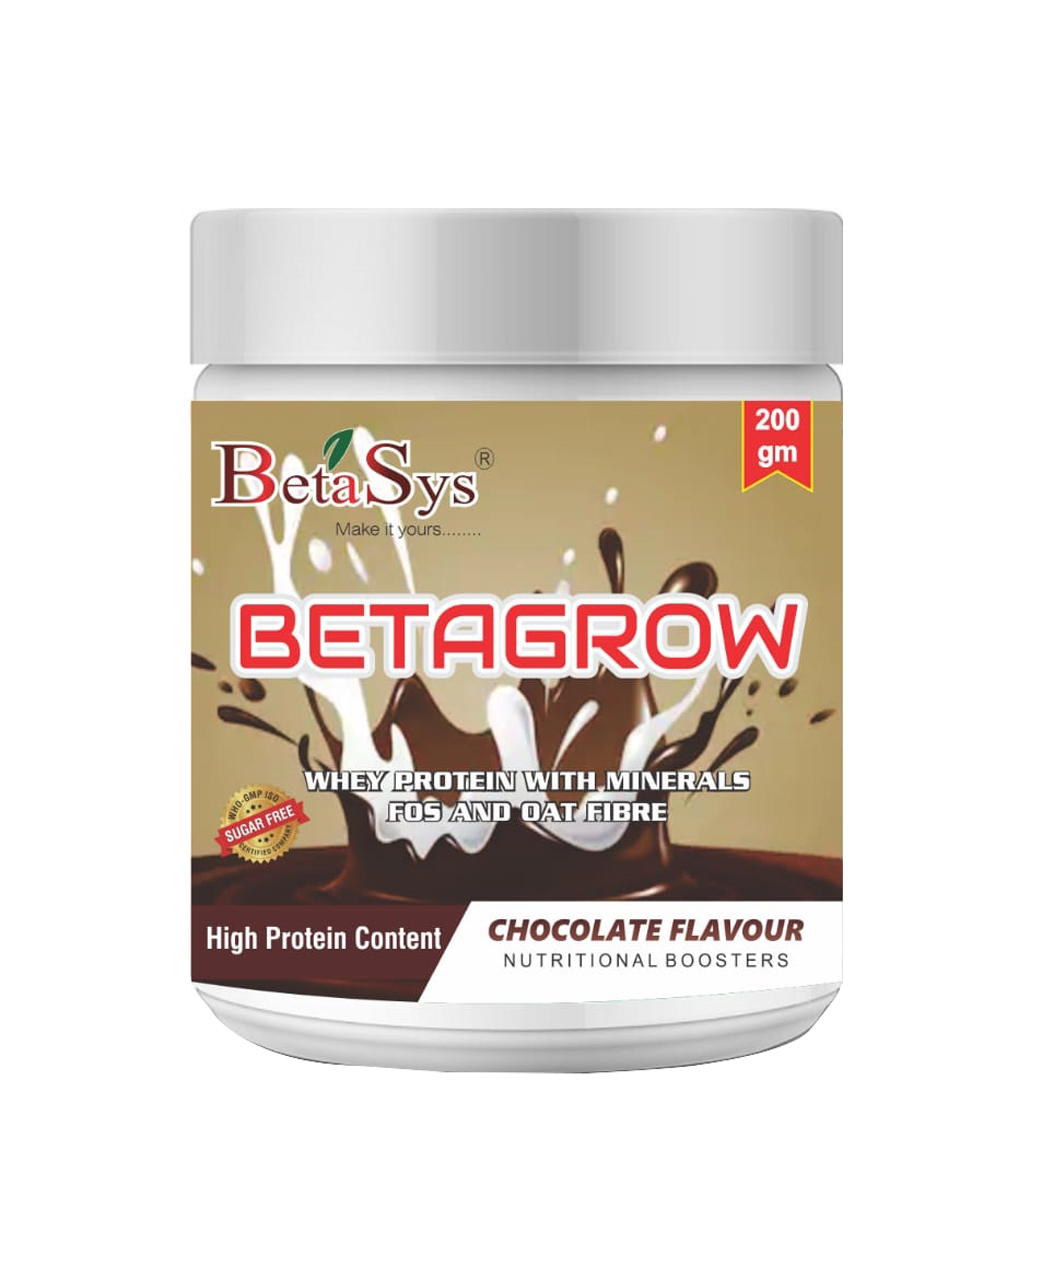 Product Name: Betagrow, Compositions of Betagrow are Whey Protein with Minerals Fos And Oat Fibre - Betasys Healthcare Pvt Ltd